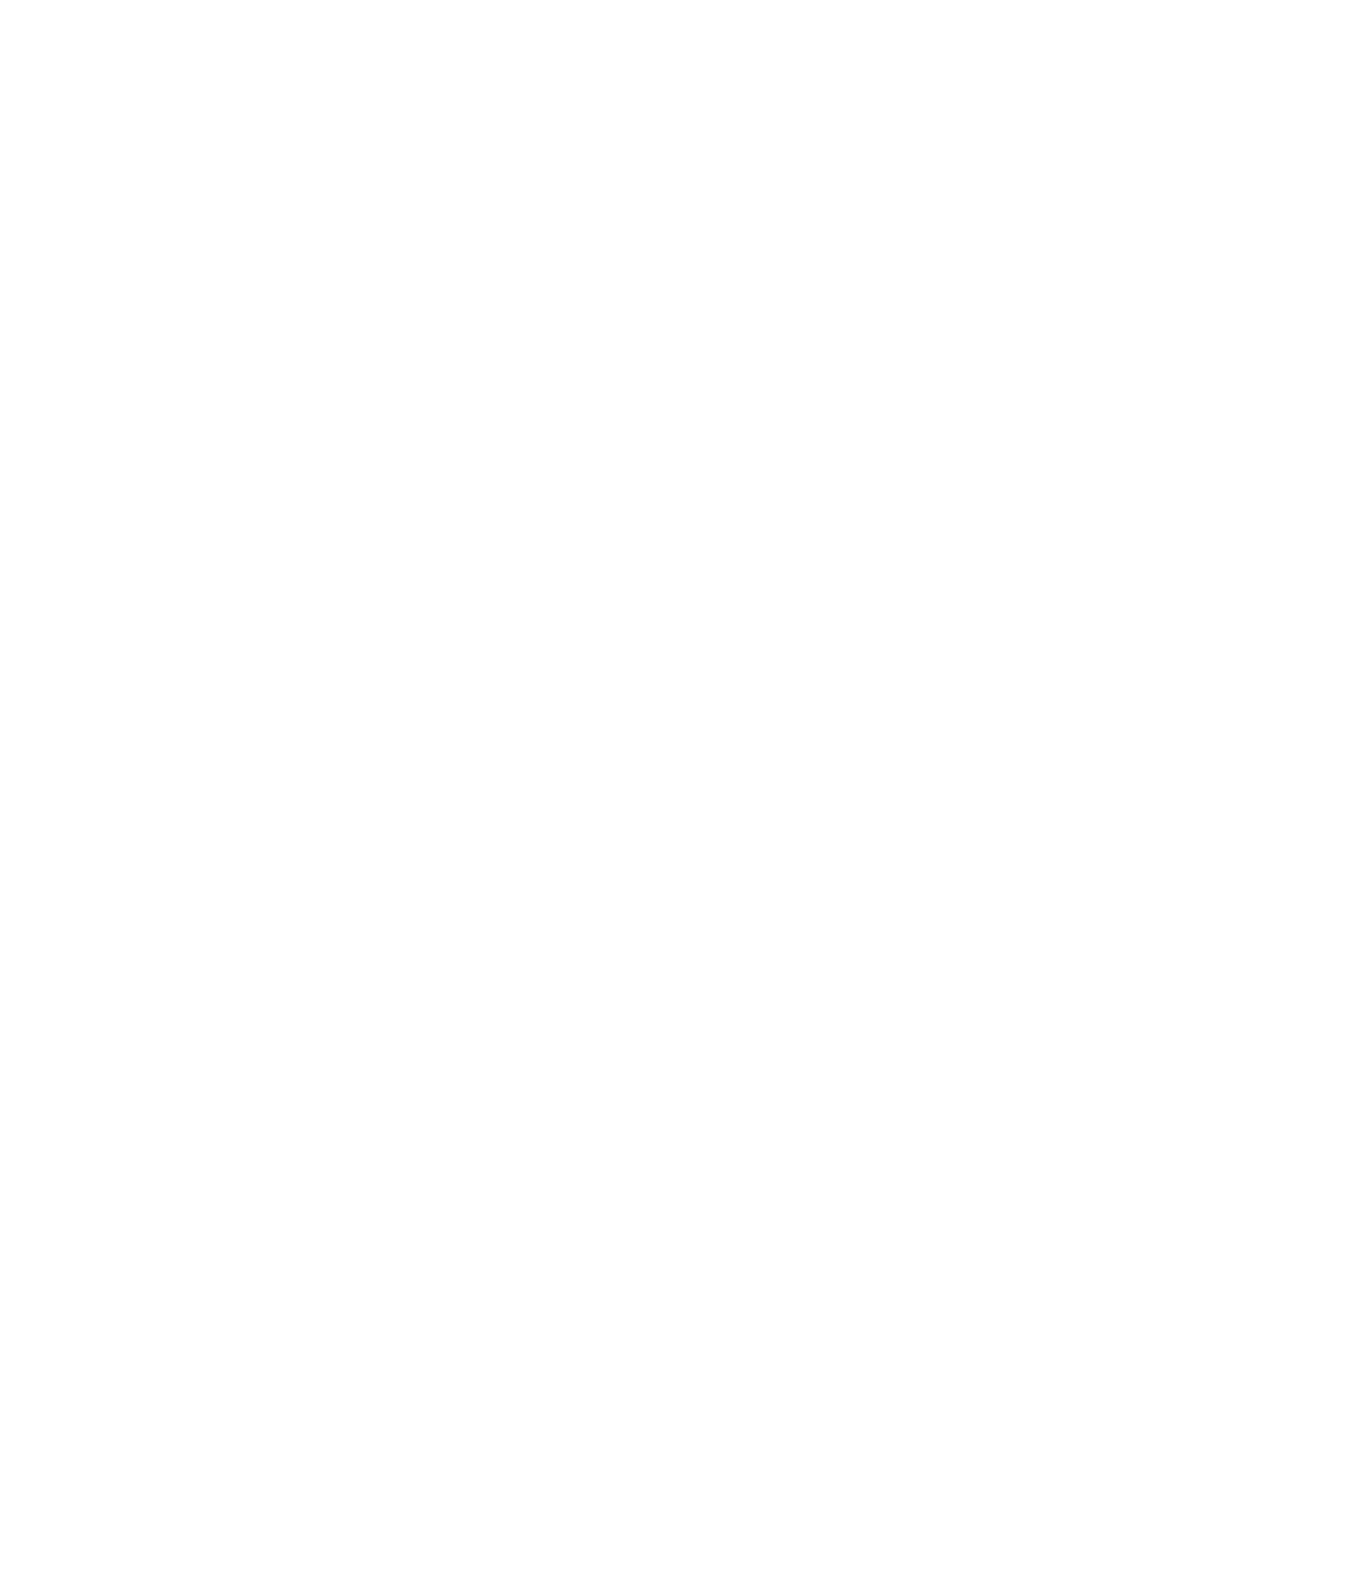 A White Baby Icon On A Black Background